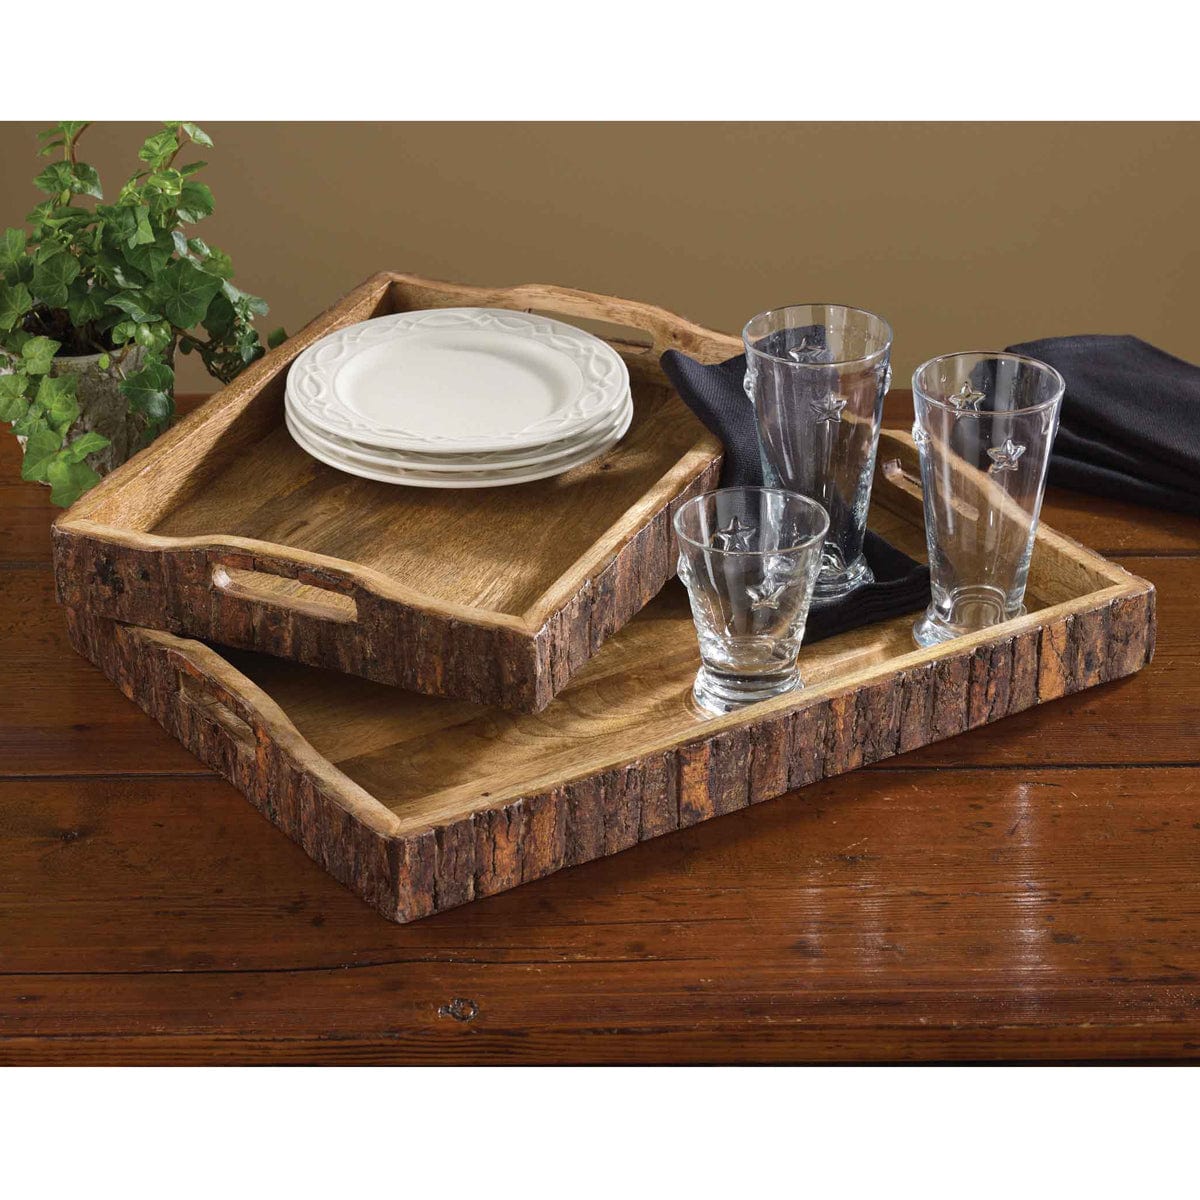 Wood with bark edge Serving Tray Set of 2-Park Designs-The Village Merchant